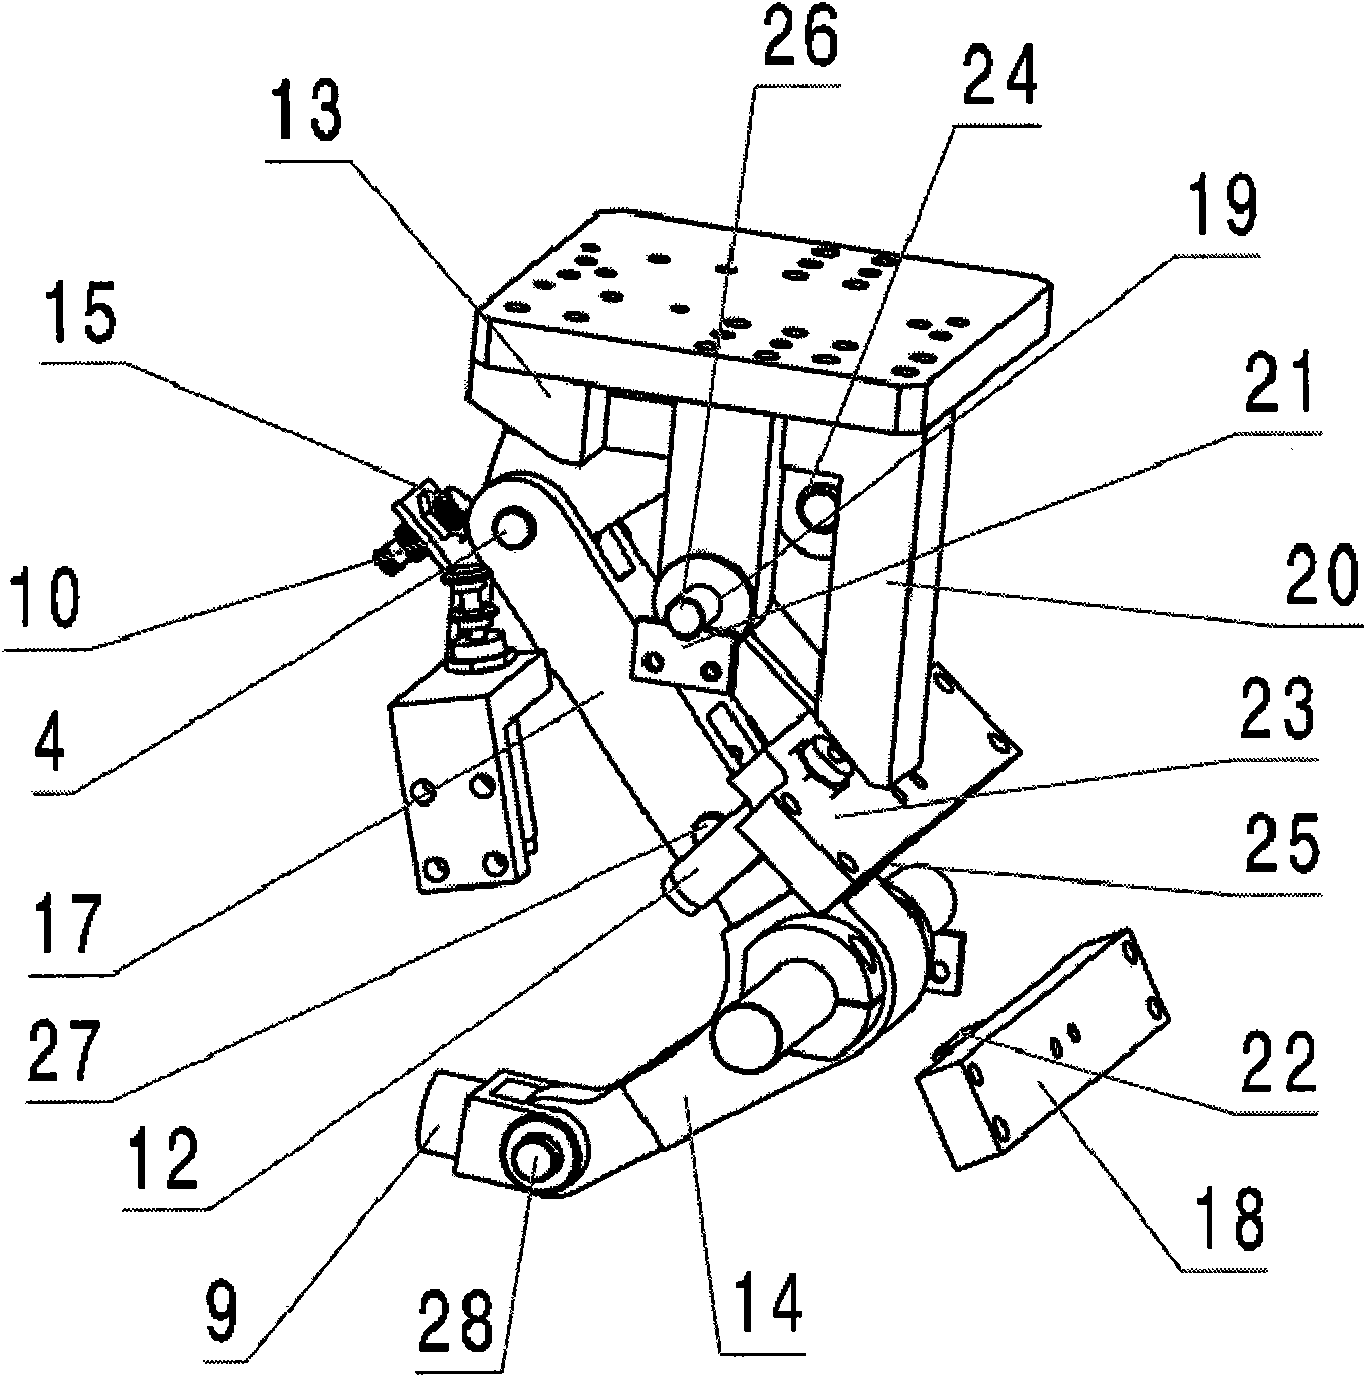 Heavy-load self-limited locking pneumatic-overturning device